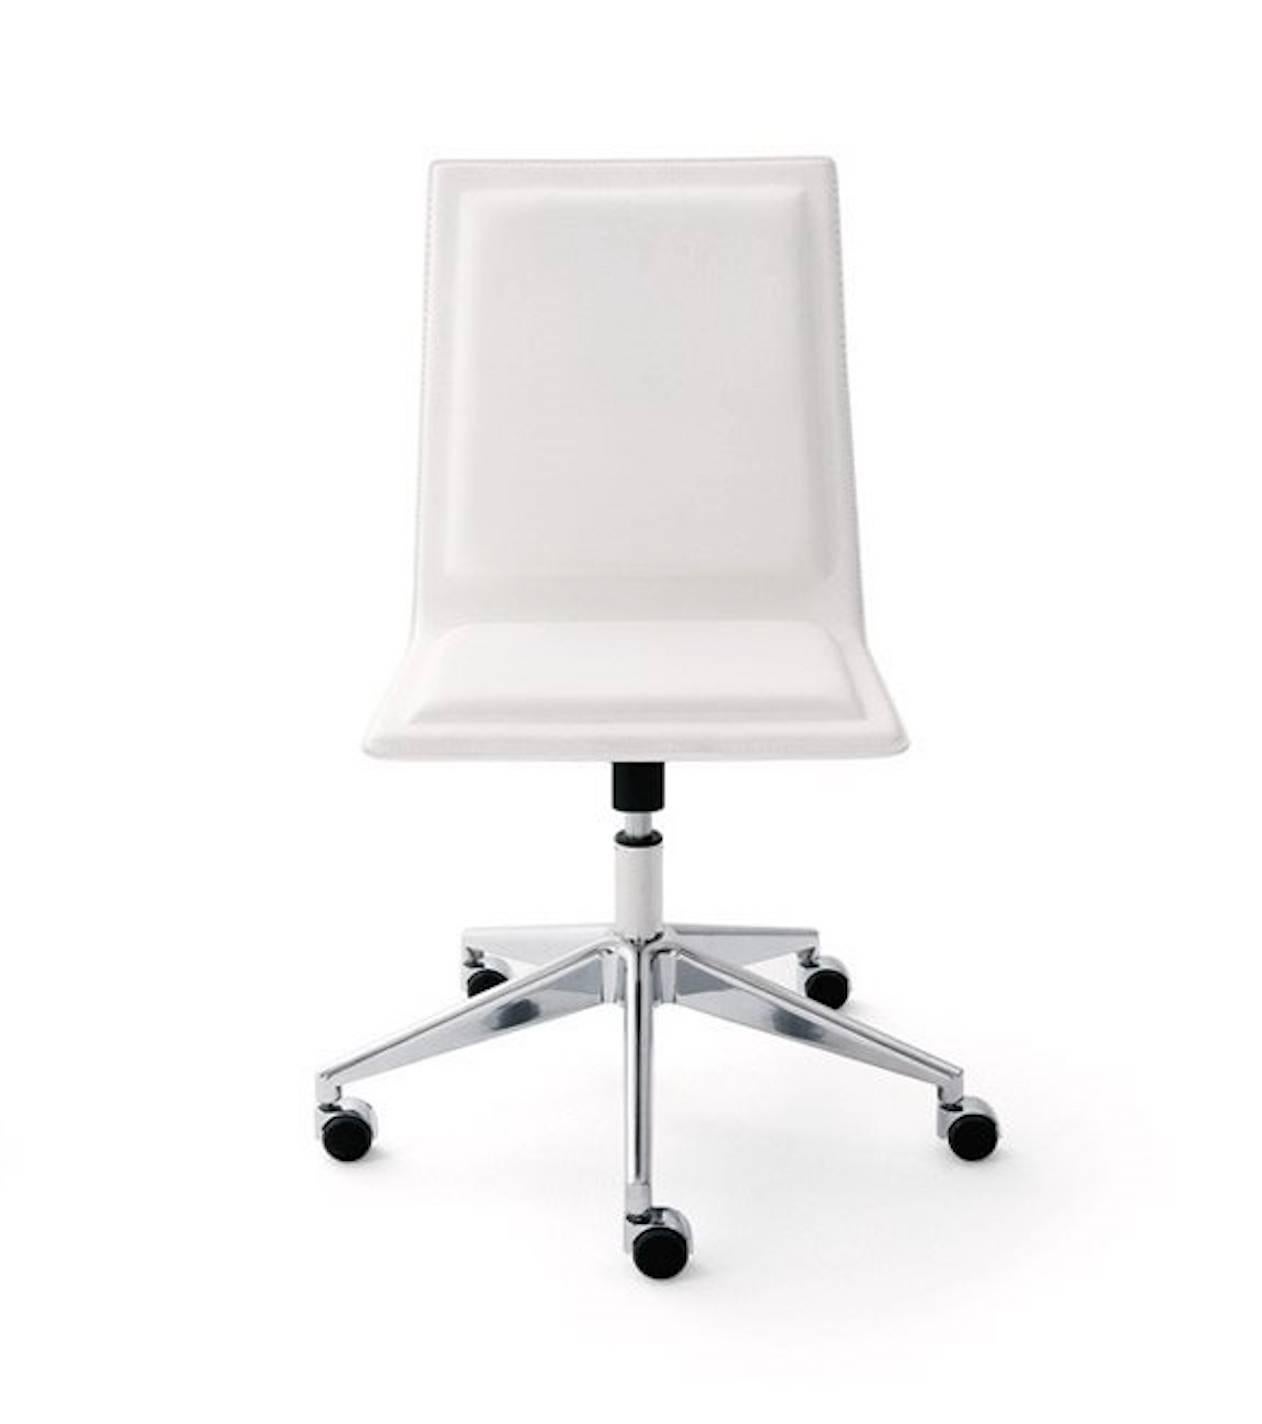 Ergonomic and elegant office/task chair. 

Upholstered seat covered with suede or eco-leather as per samples. 

Three different heights for backrest. Swivel five-star base made of die-cast aluminium. Gas lift height adjustment, with castors or